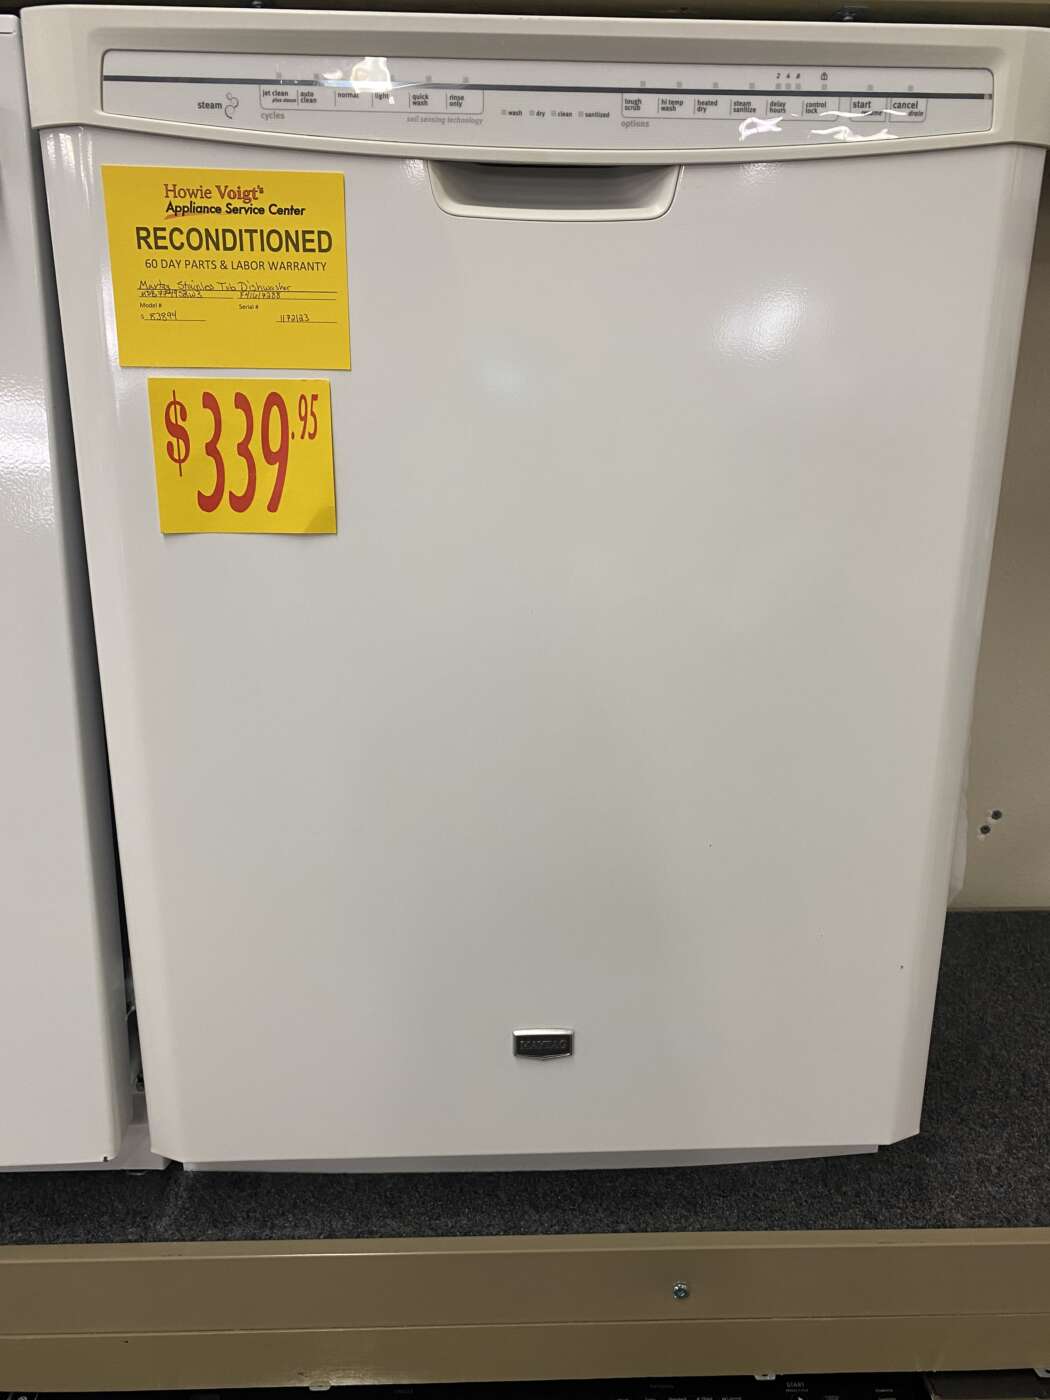 Reconditioned MAYTAG Dishwasher With Stainless Steel Tub